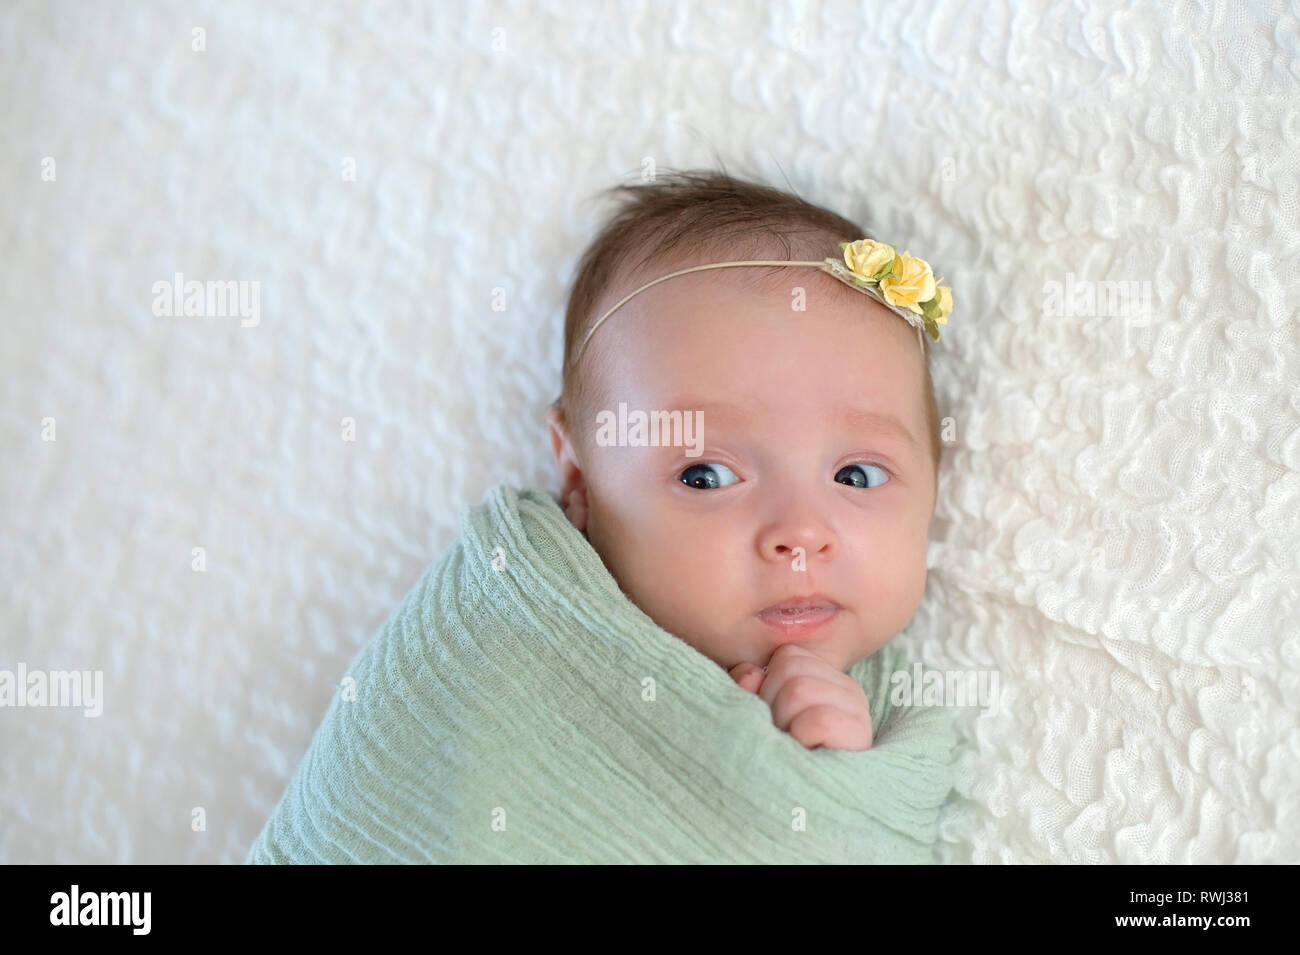 Alert one month old baby girl swaddled in a mint green colored wrap. She has a funny expression on her face. Stock Photo